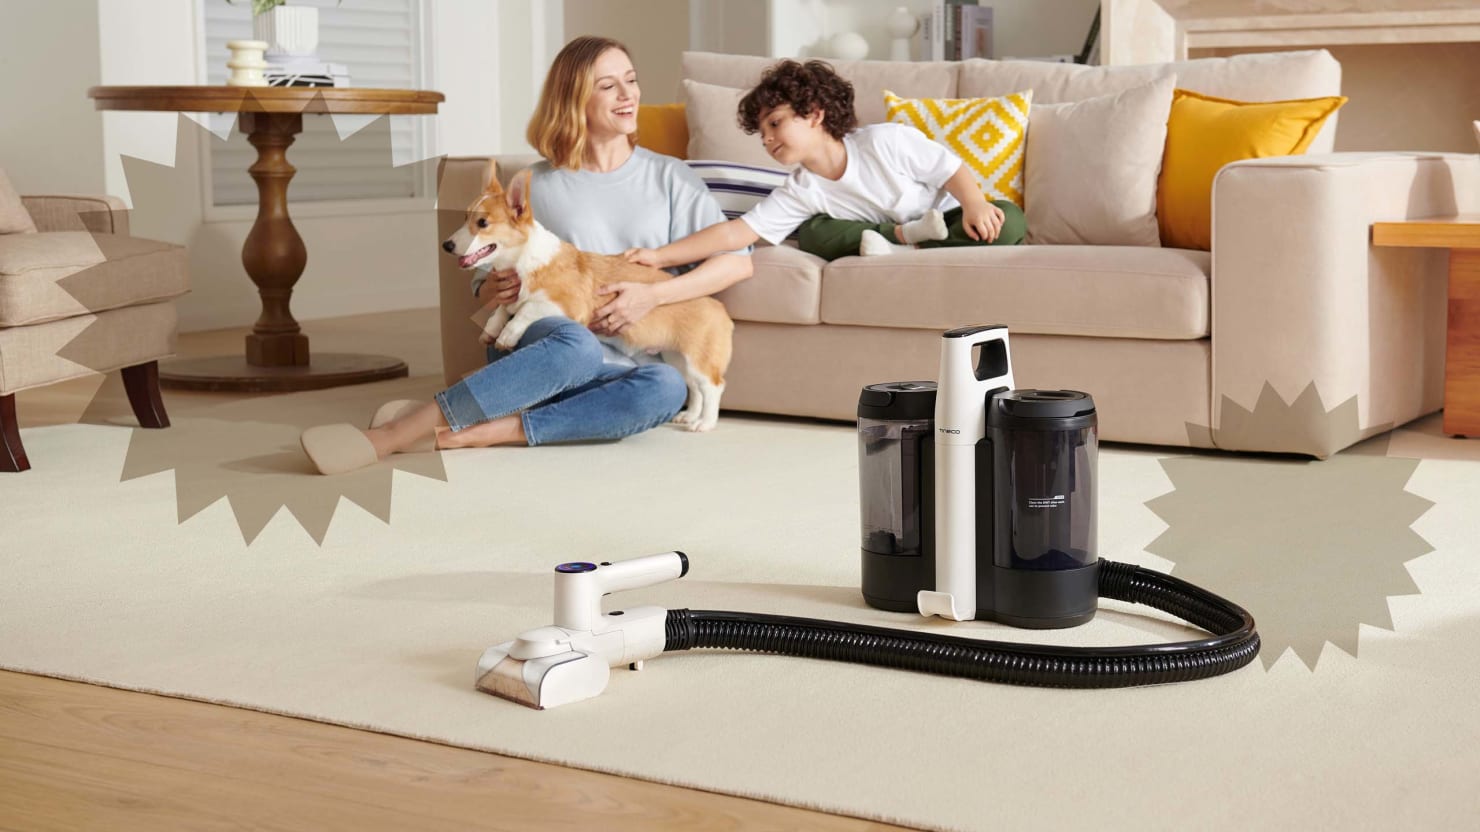  Tineco Carpet Cleaning Solution for CARPET ONE, CARPET